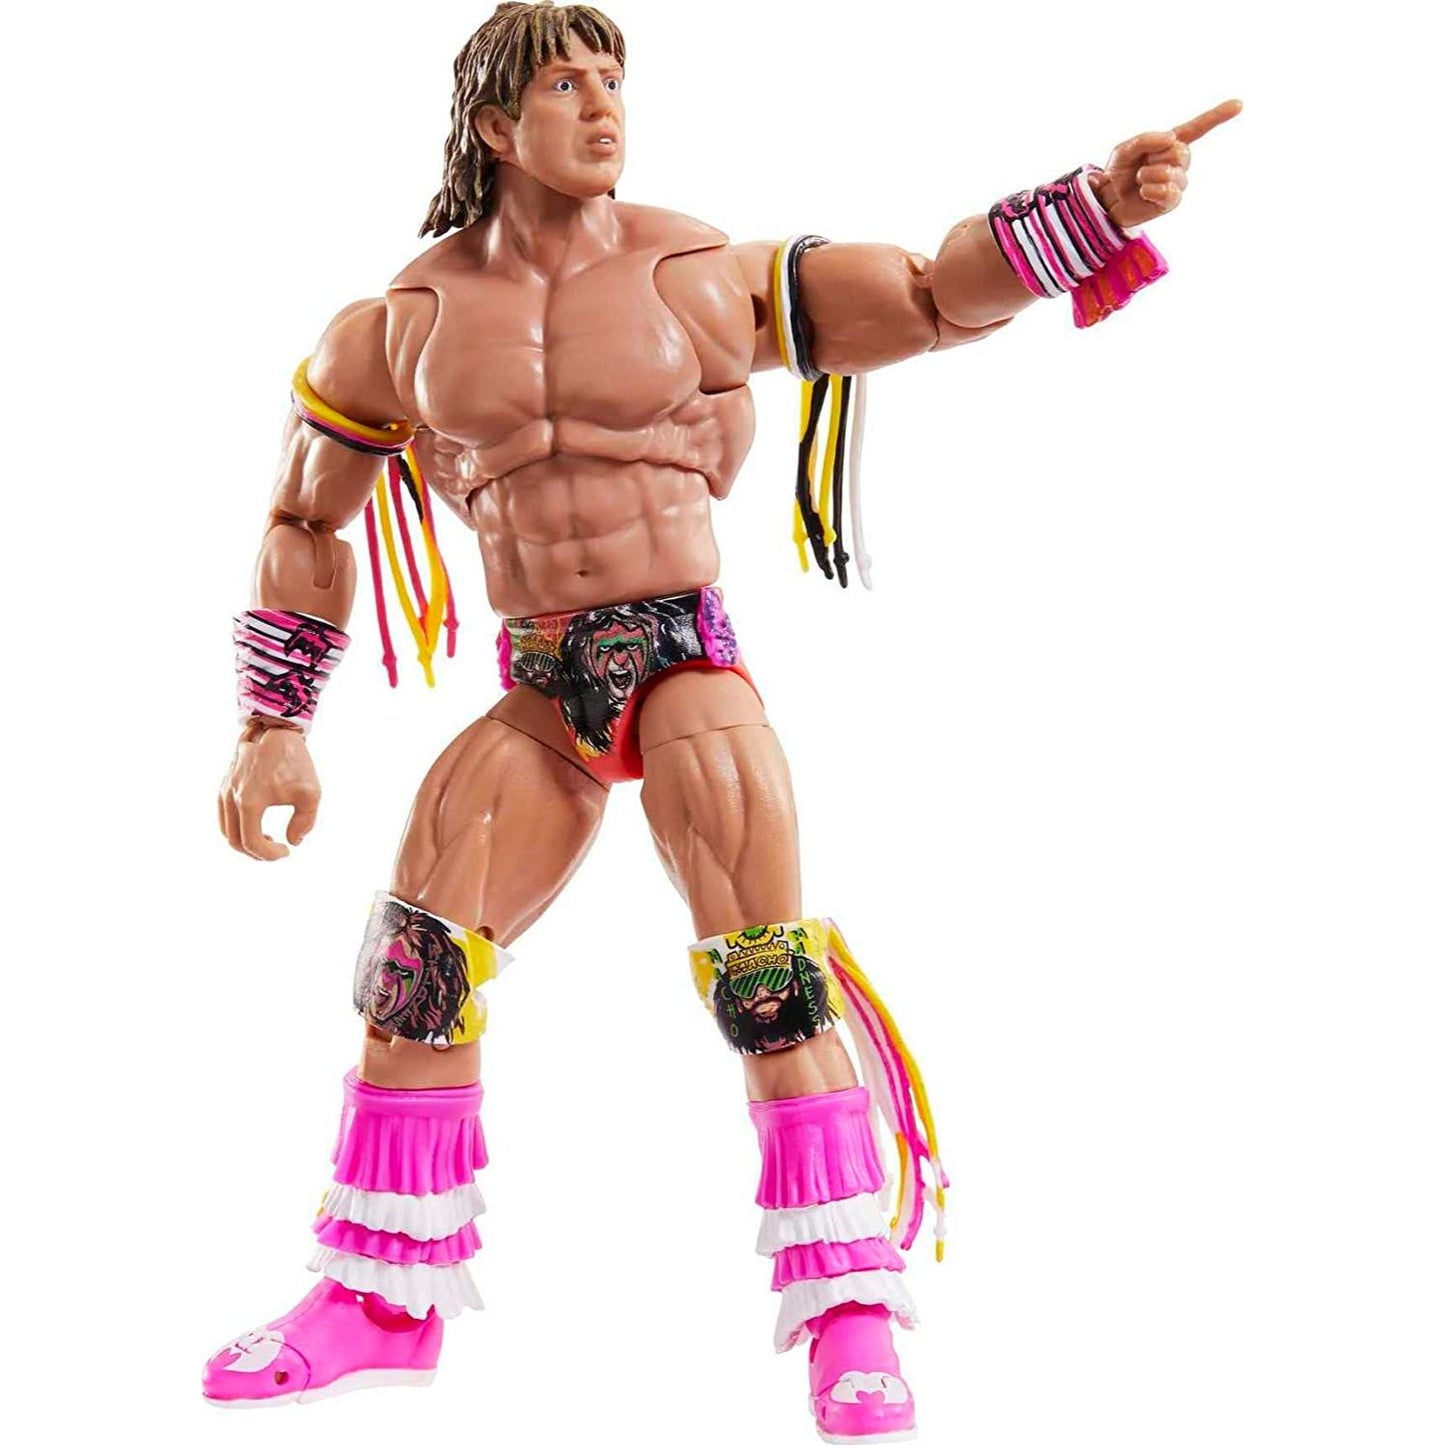 WWE Ultimate Warrior Ultimate Edition Action Figure Toy